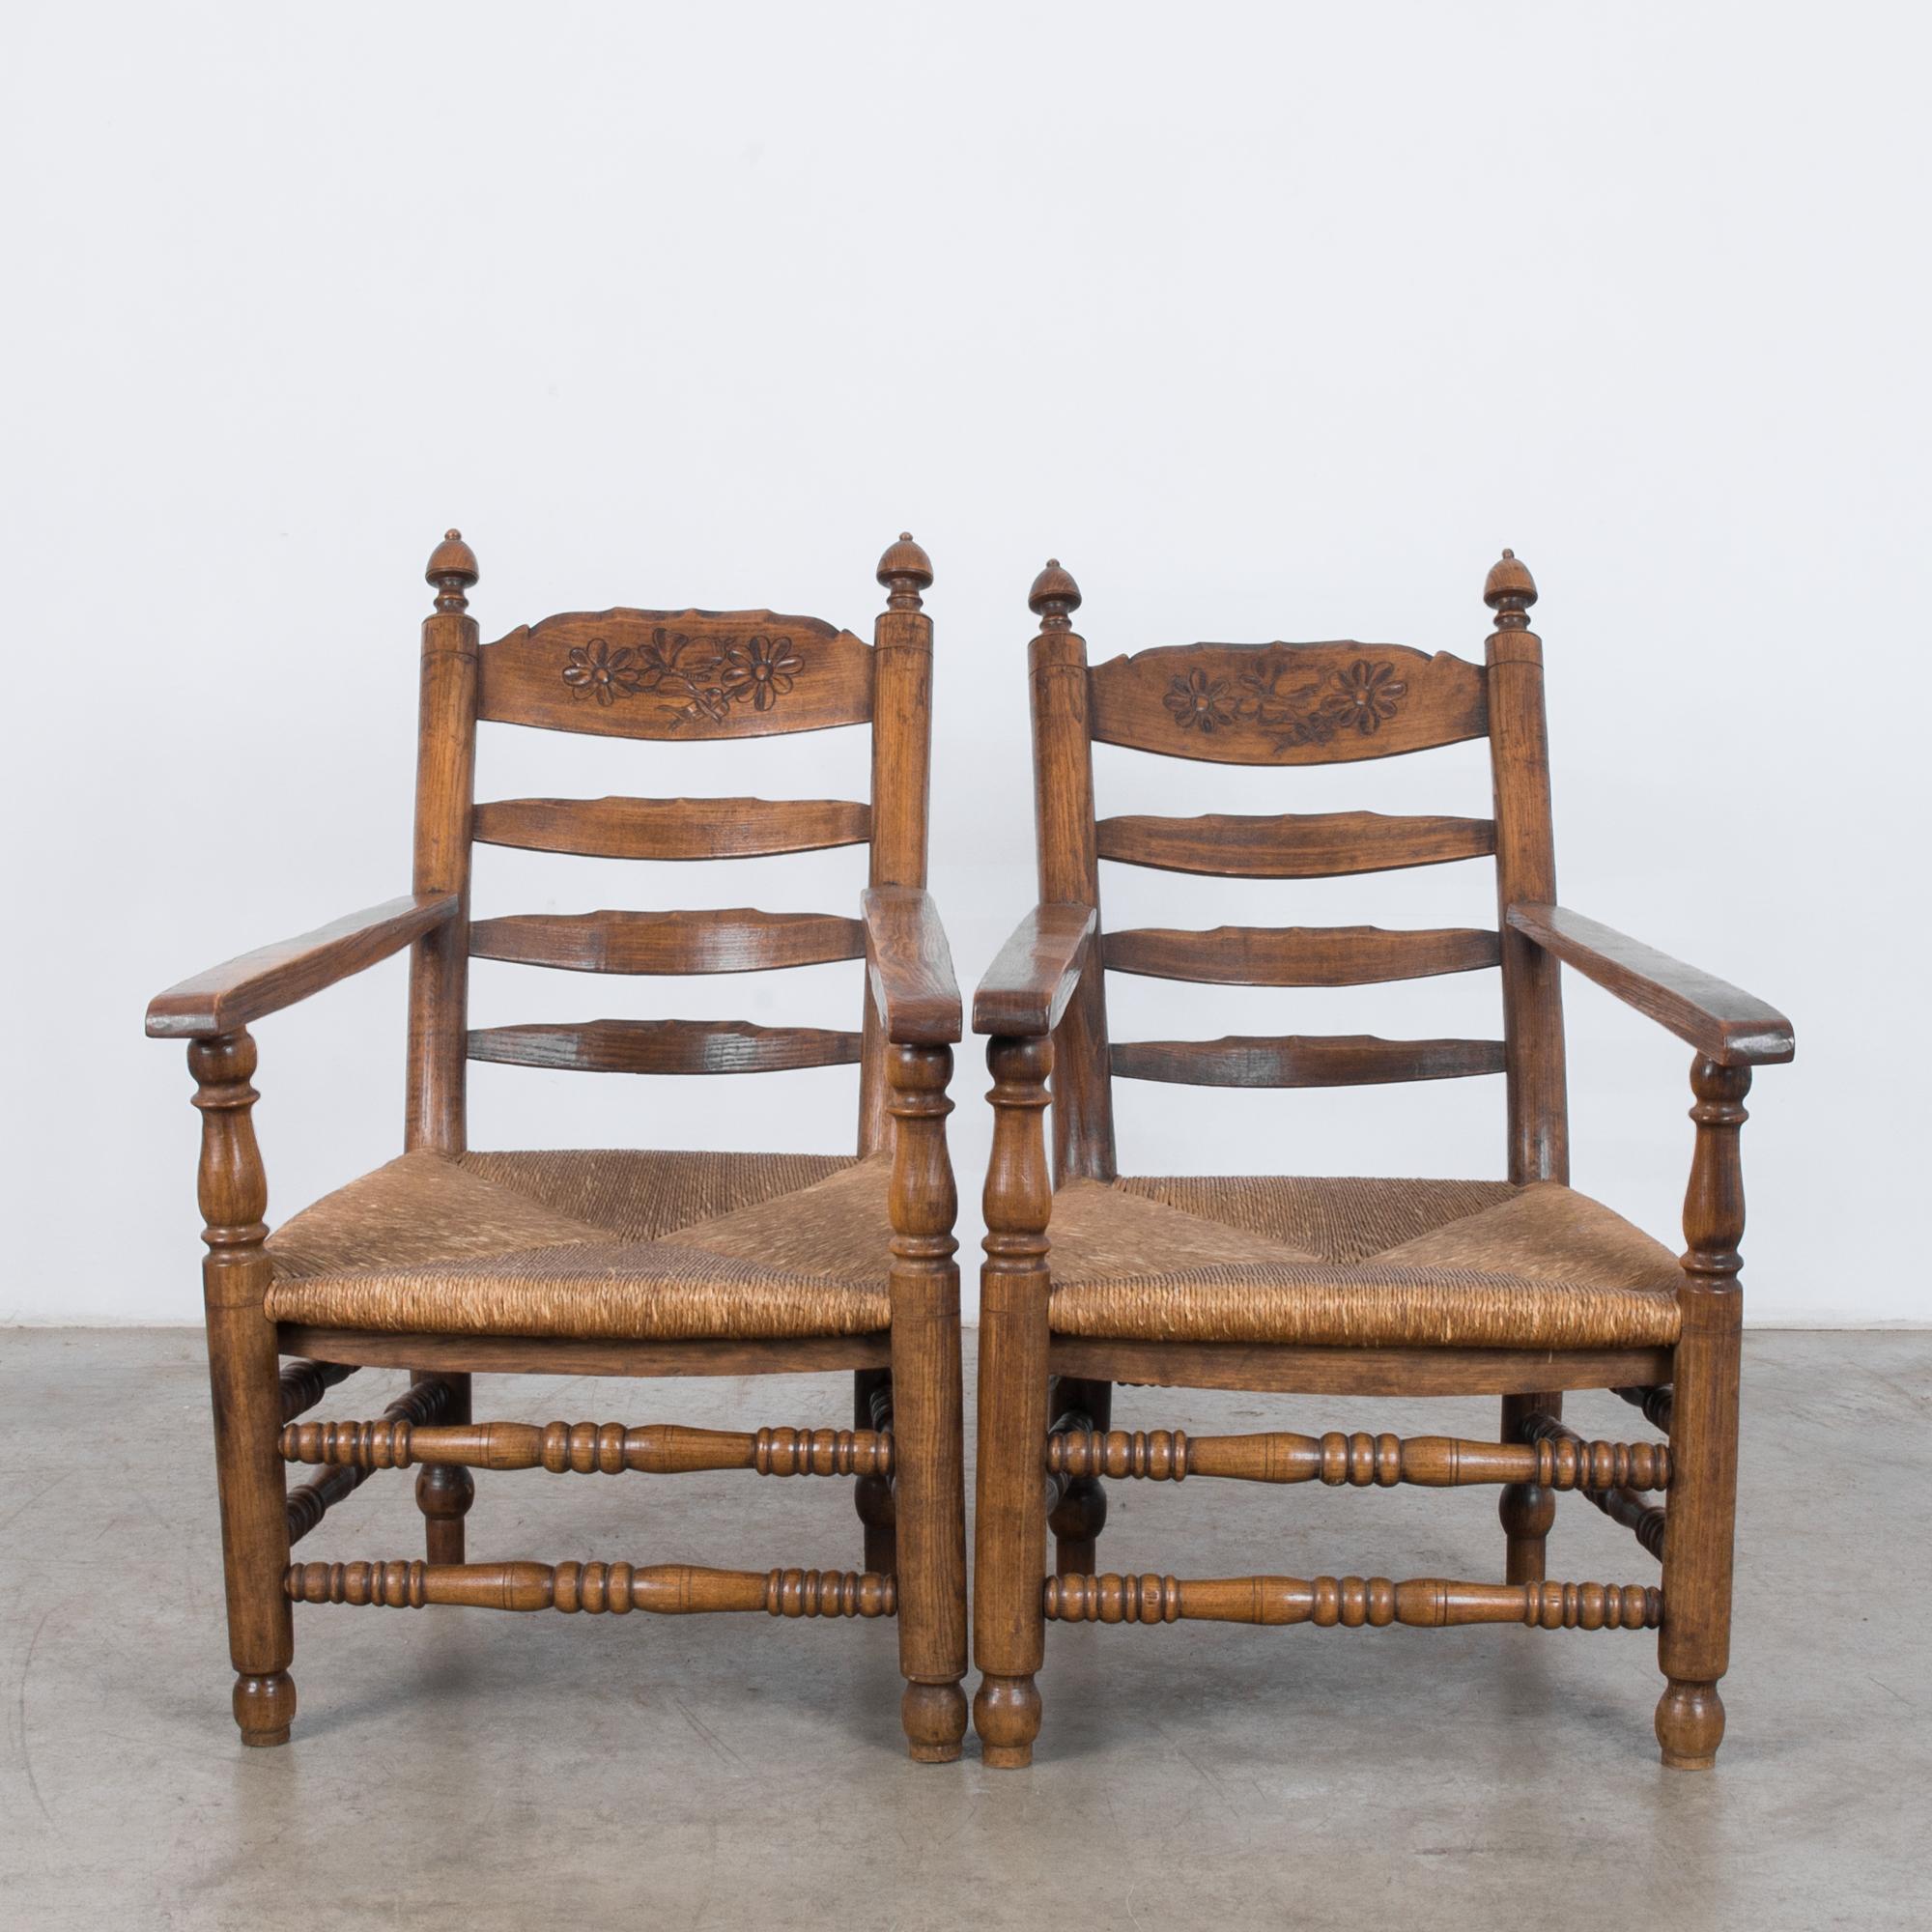 This pair of wooden armchairs with wicker seats and horizontal armrests was made in France, circa 1900. The reclined back comprises four rails with decorative floral carvings on the top rail. The polished wooden frame has a warm character, and the